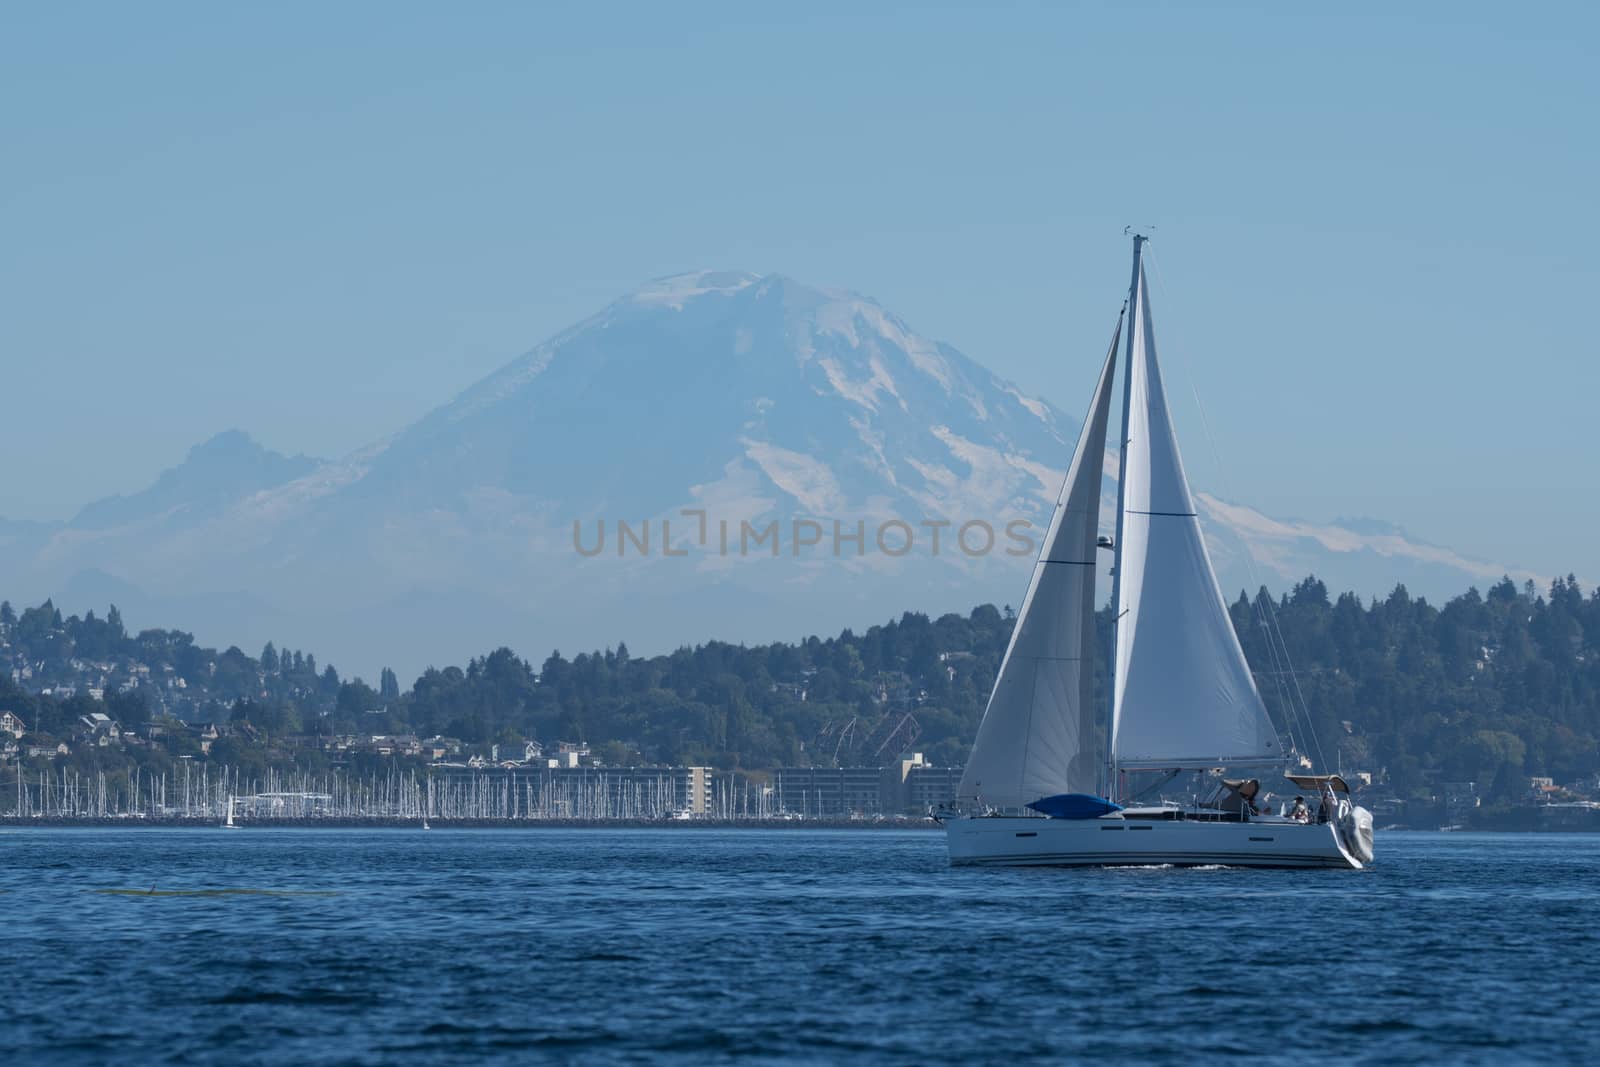 Sailing yacht out for afternoon sail on Puget Sound with Mount Rainier in the background.